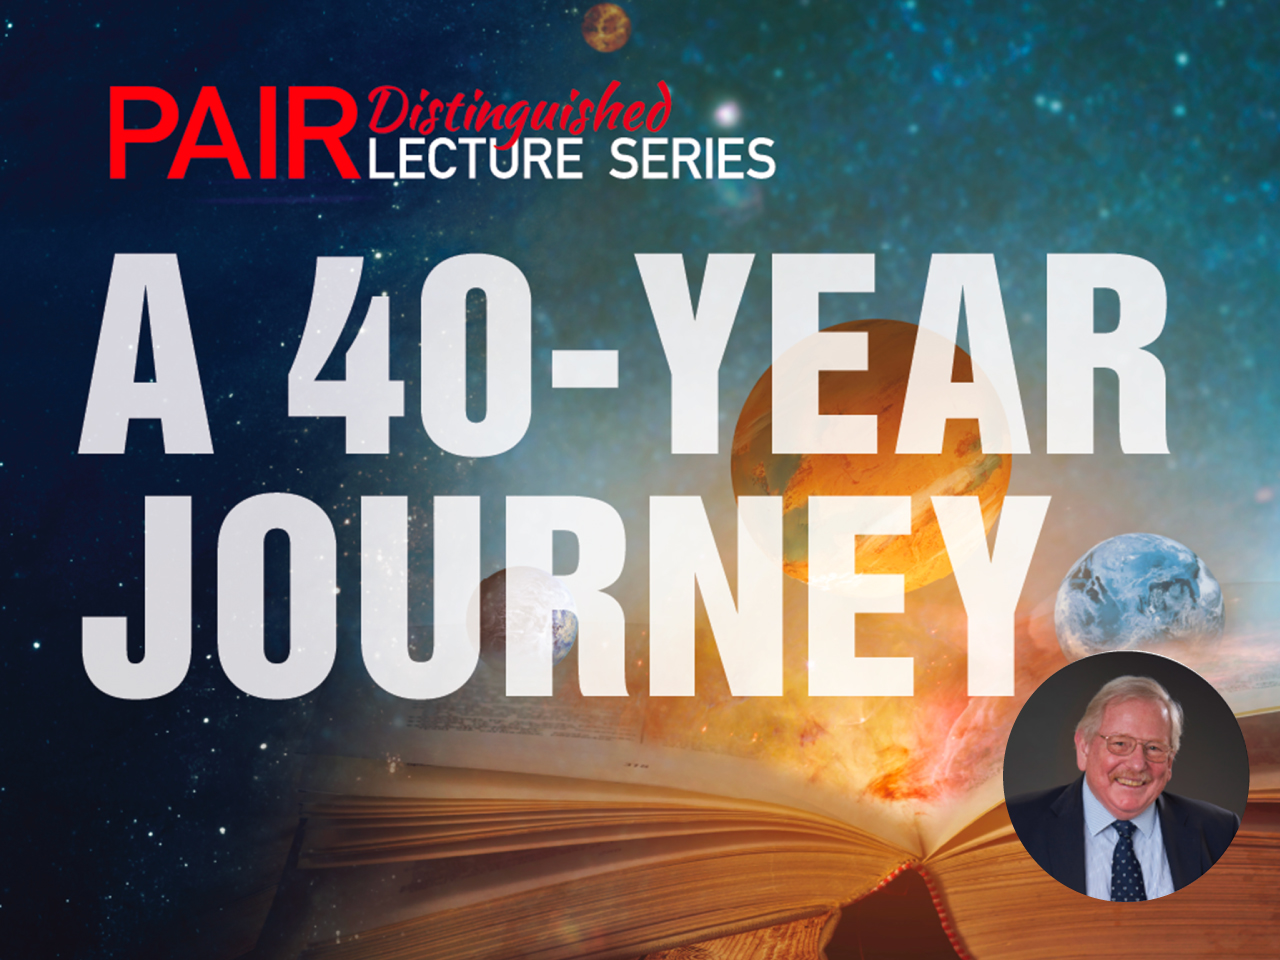 PAIR distinguished lecture series : a 40-year journey by Professor Reinhard Genzel